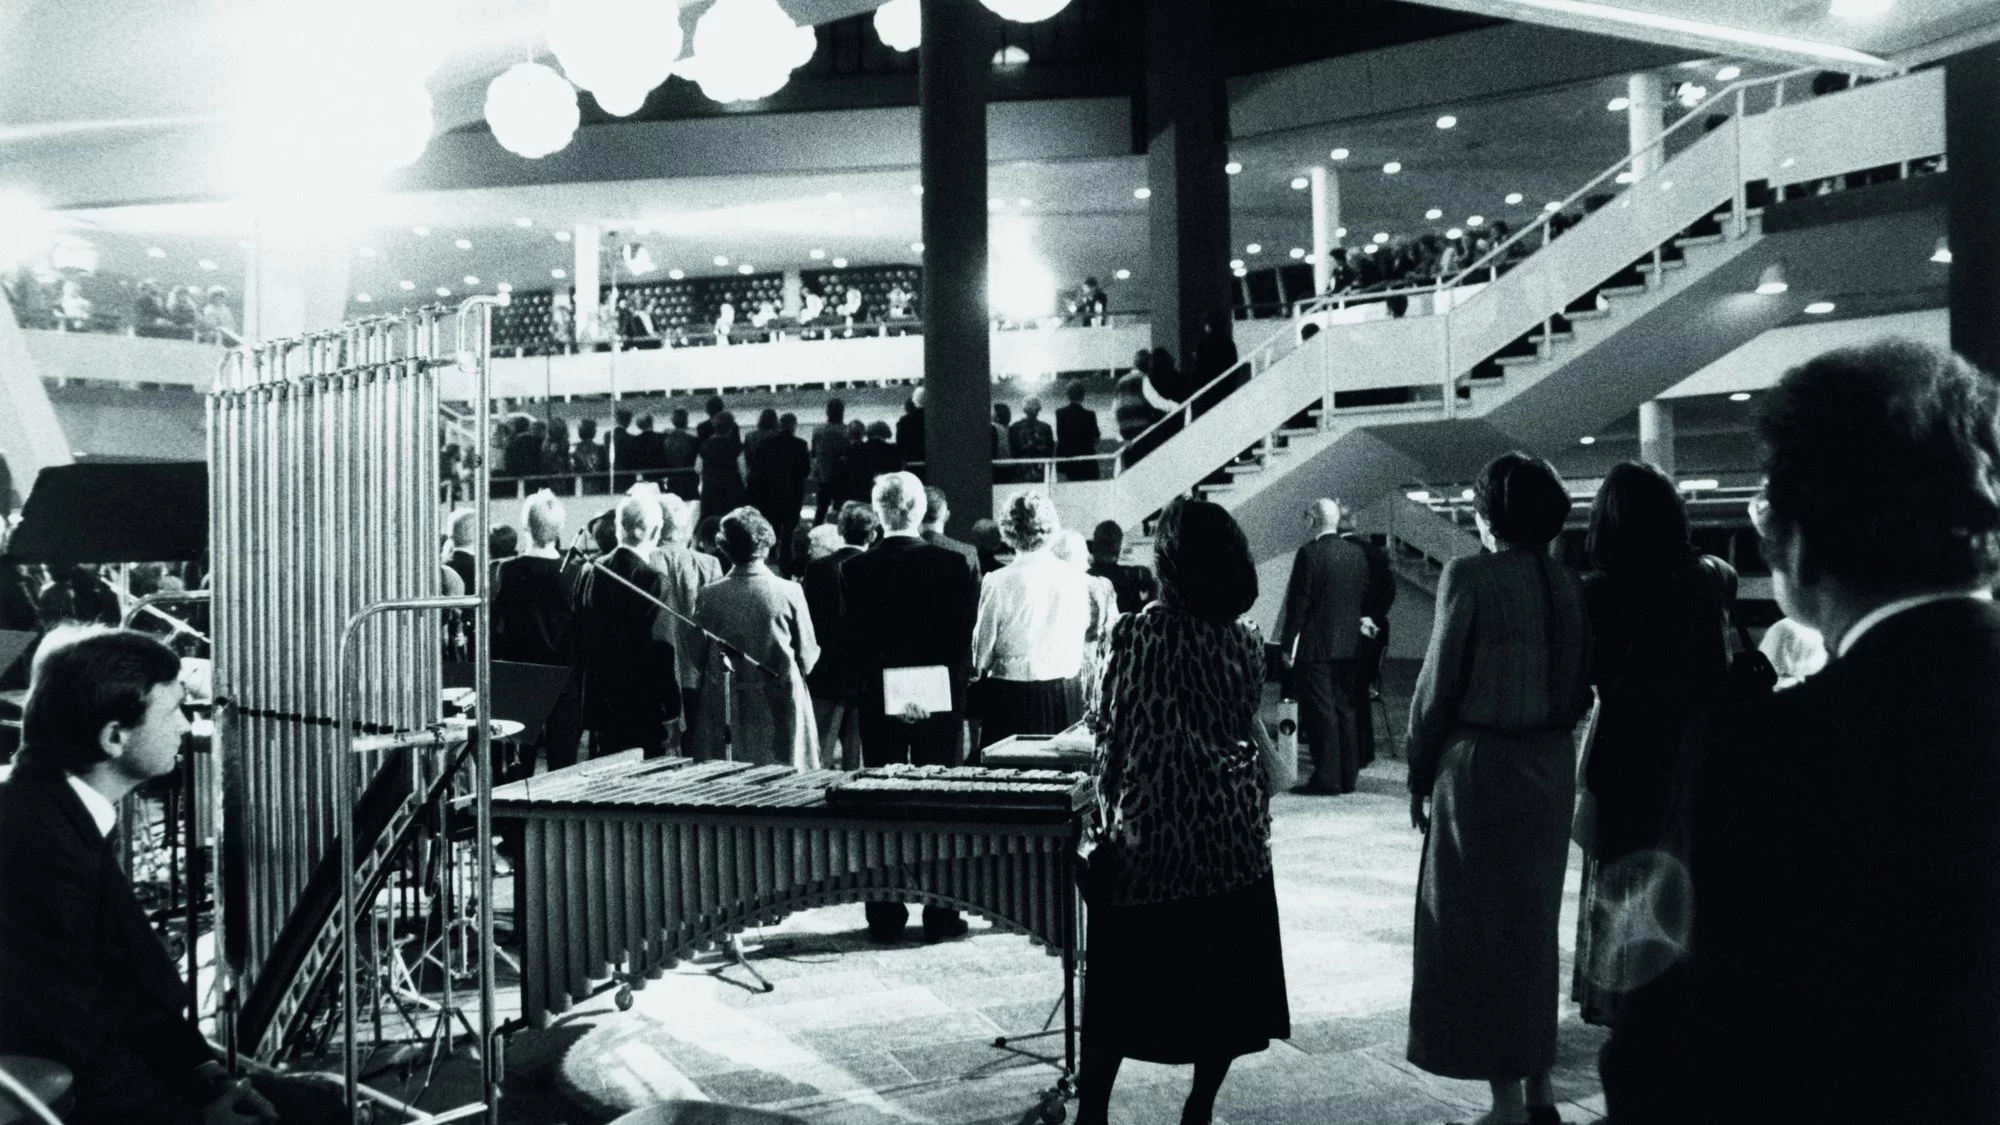 Black and white photo of the foyer of the Kammemusiksaal with guests and musical instruments